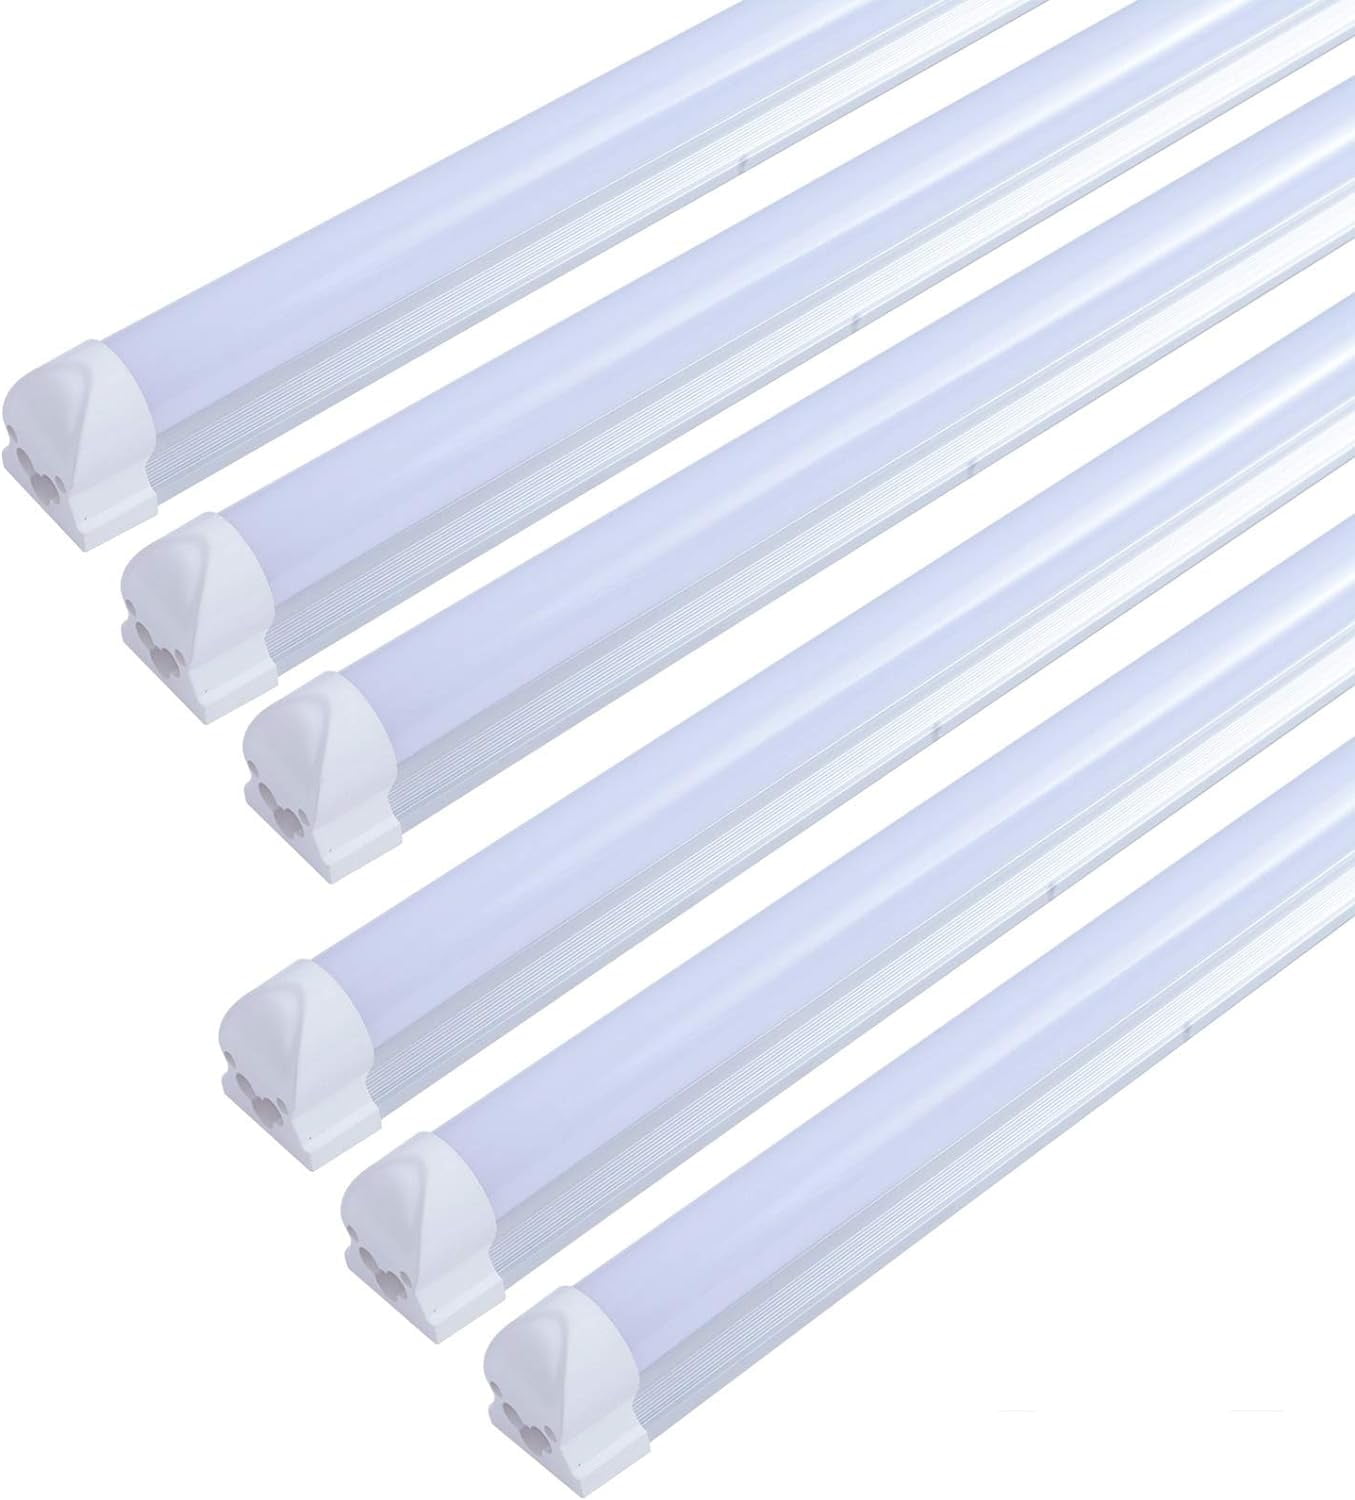 6 Pack T8 4FT 24W LED Integrated Tube Light Fixture,Shop Light With ON ...